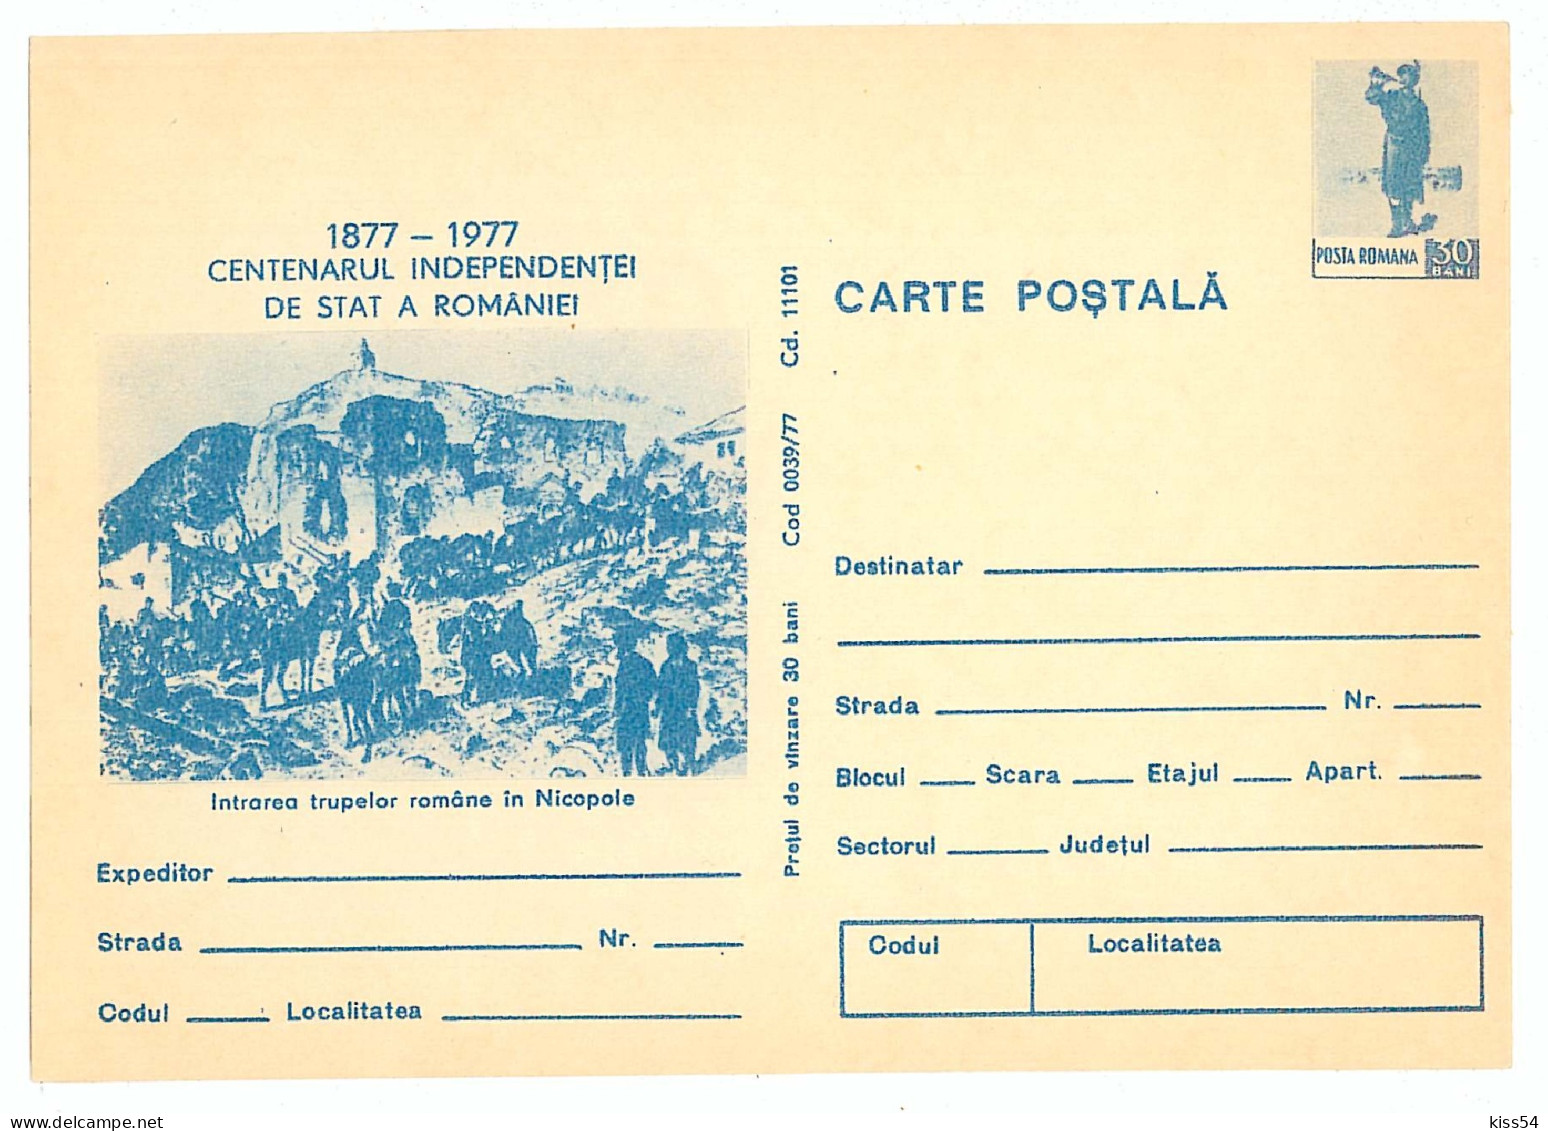 IP 77 A - 39 Centenary Independence Of Romania - Stationery - Unused - 1977 - Enteros Postales